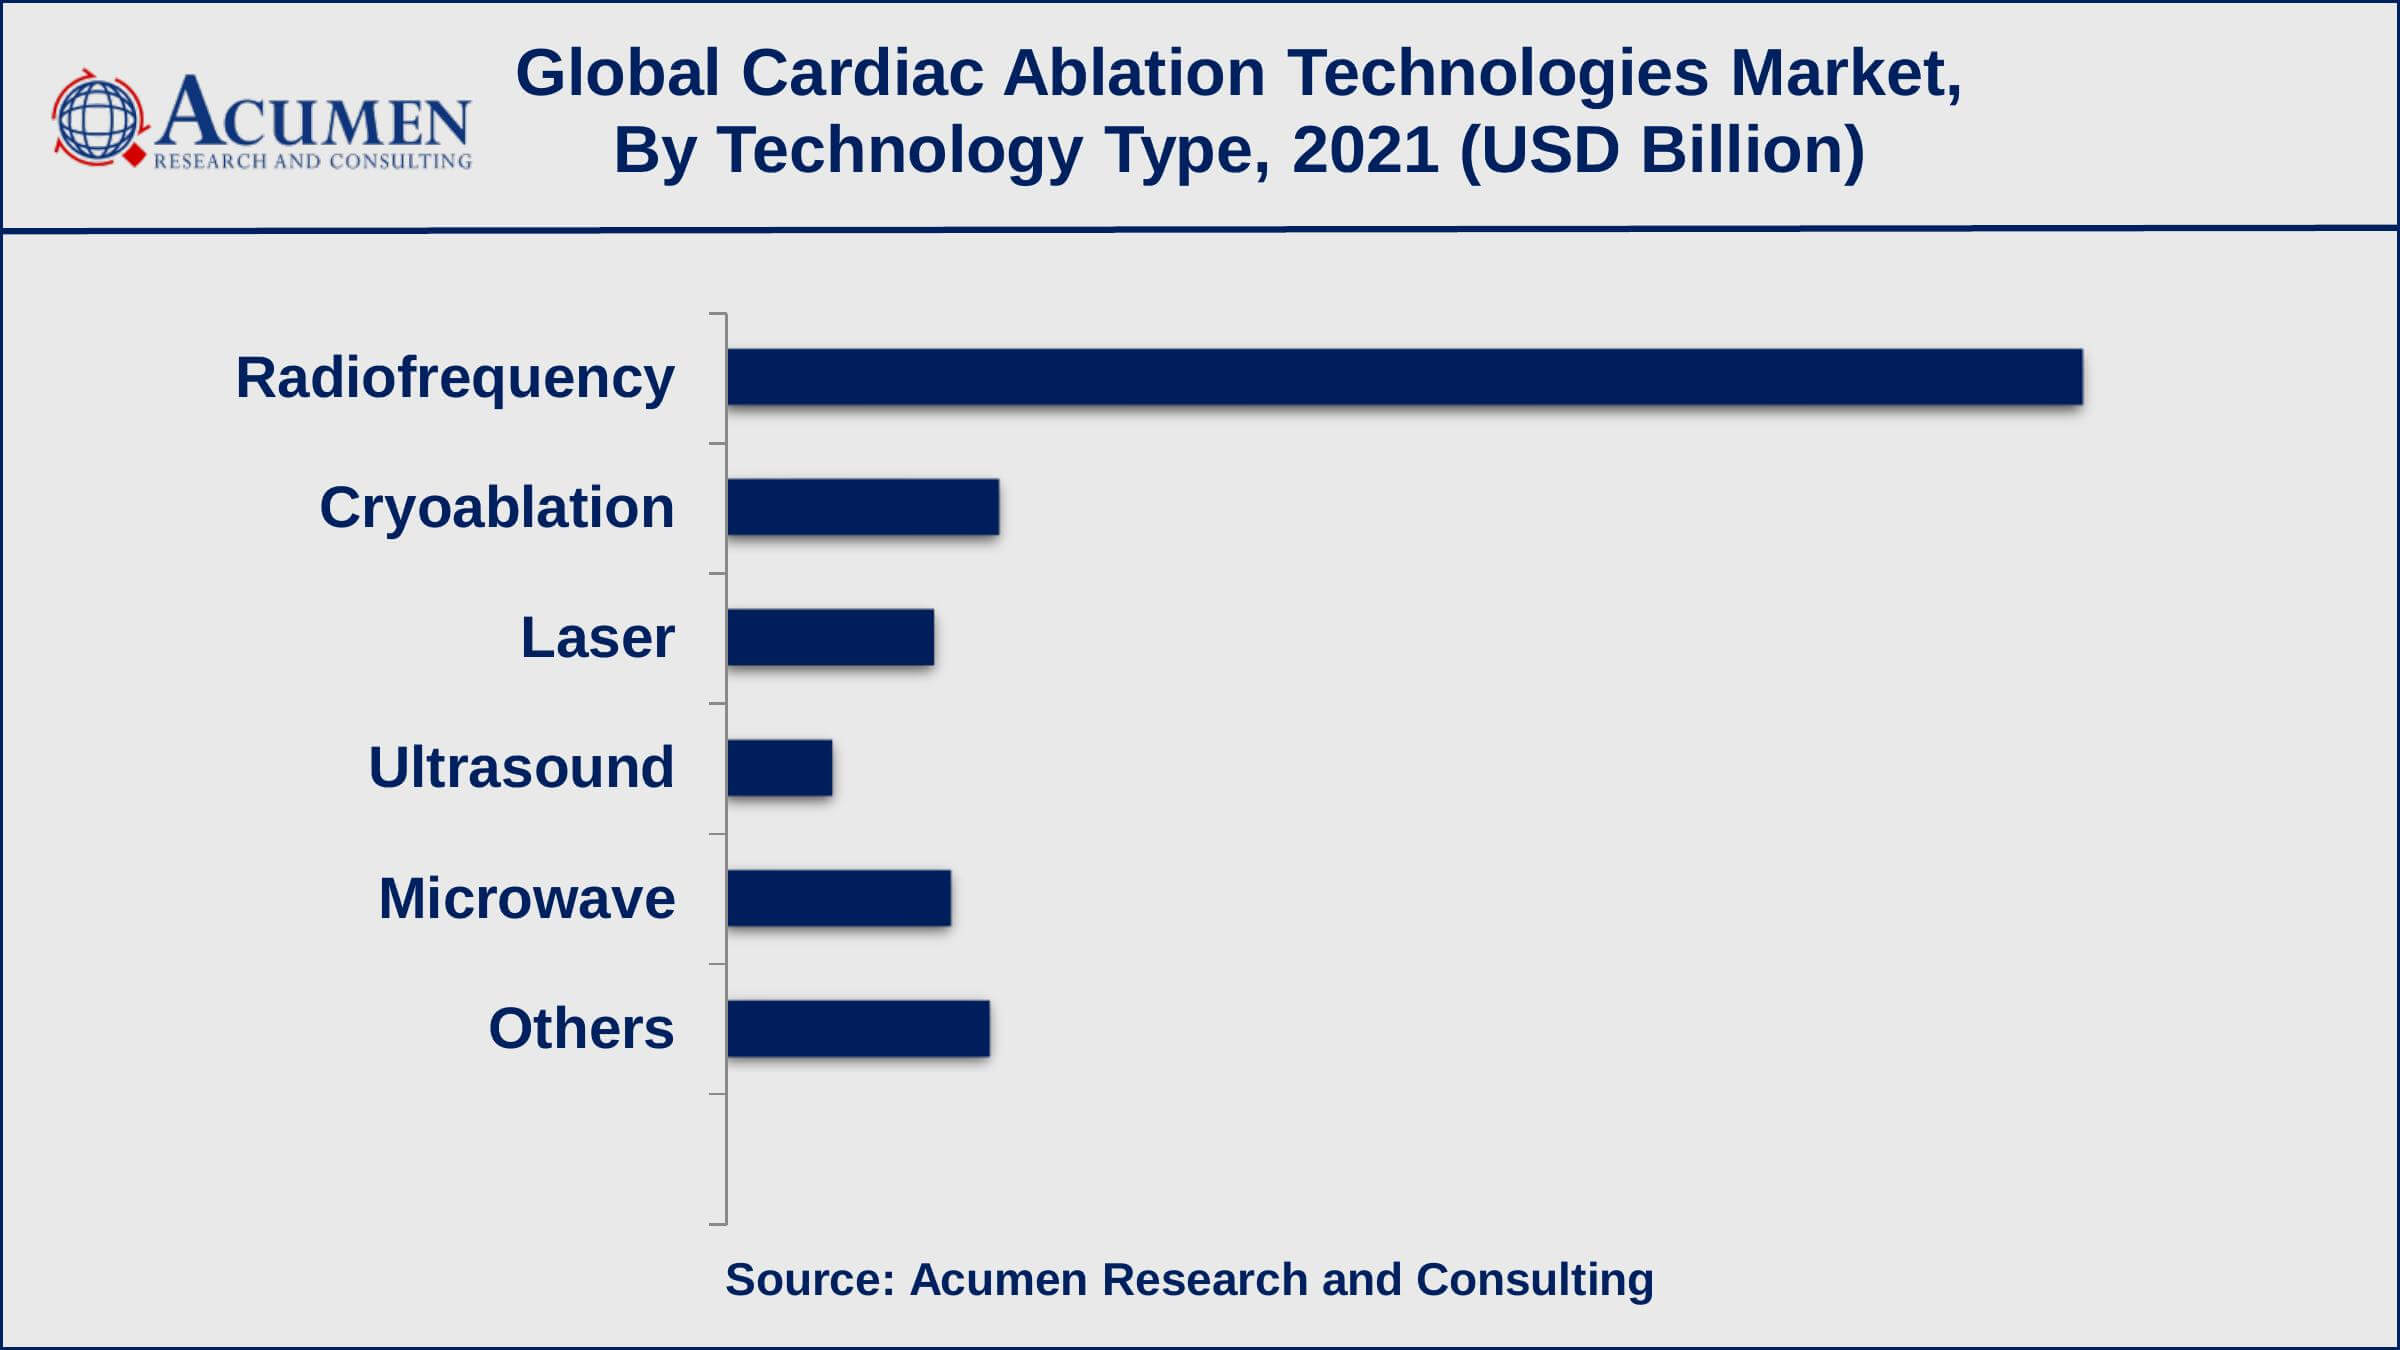 Based on technology type, radiofrequency recorded over 56% of the overall market share in 2021